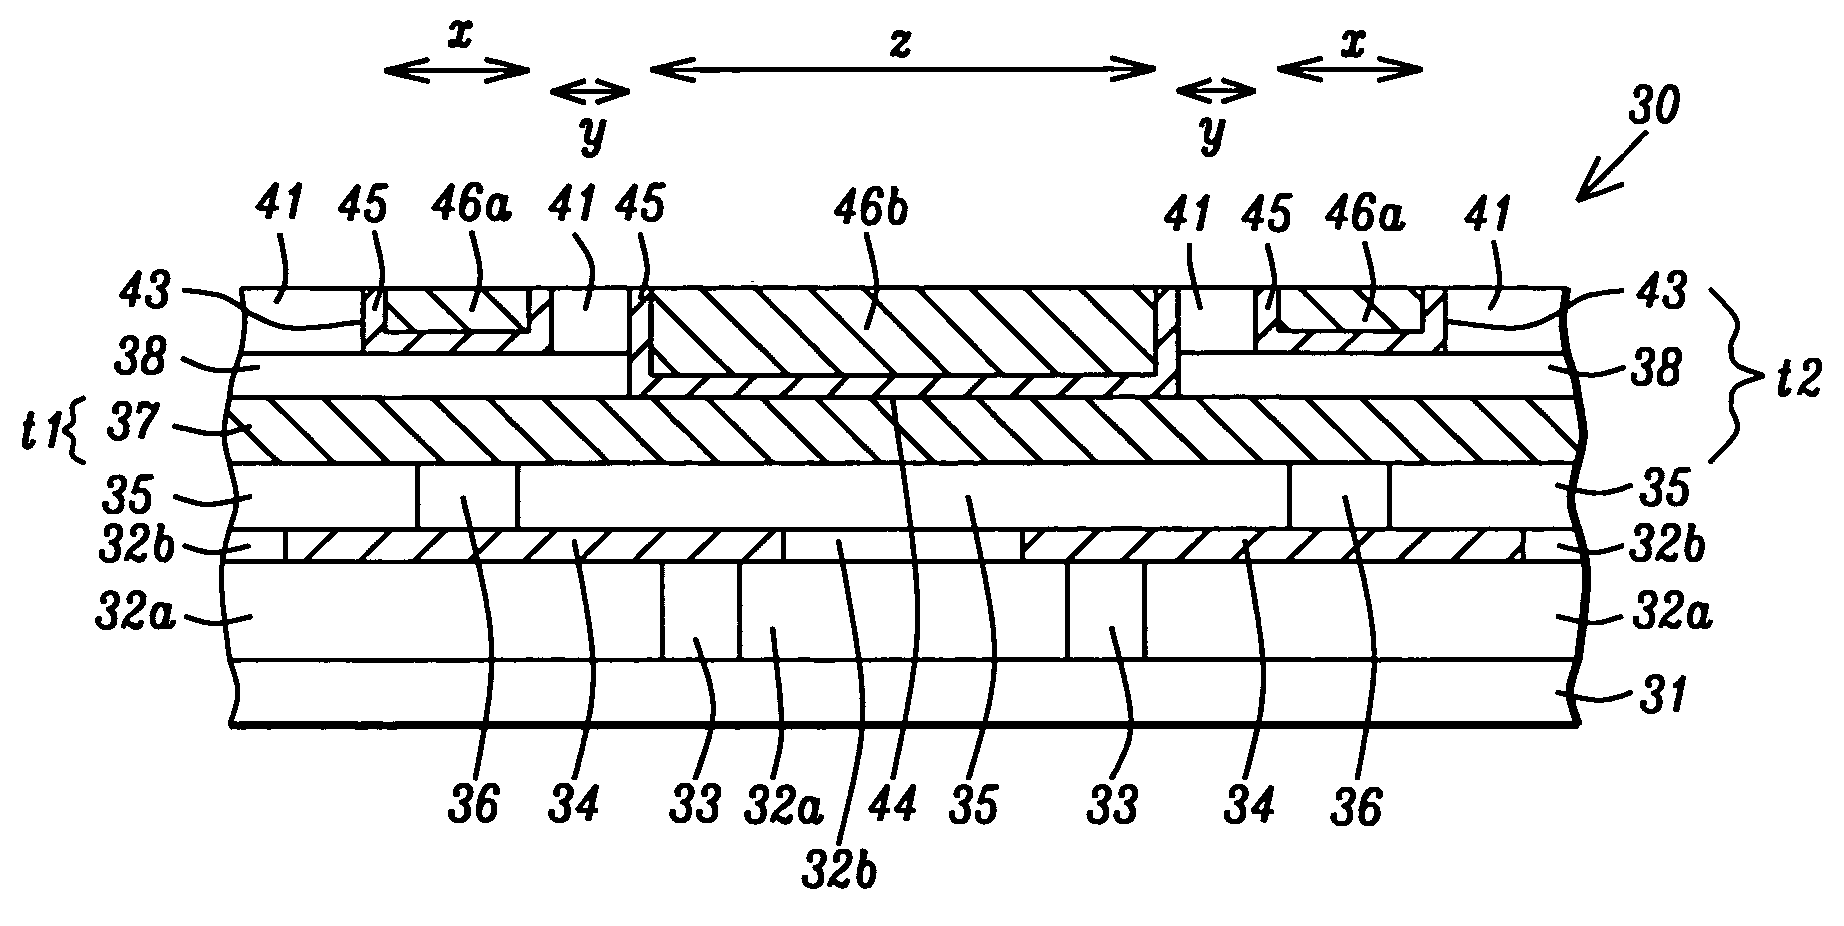 MRAM arrays with reduced bit line resistance and method to make the same